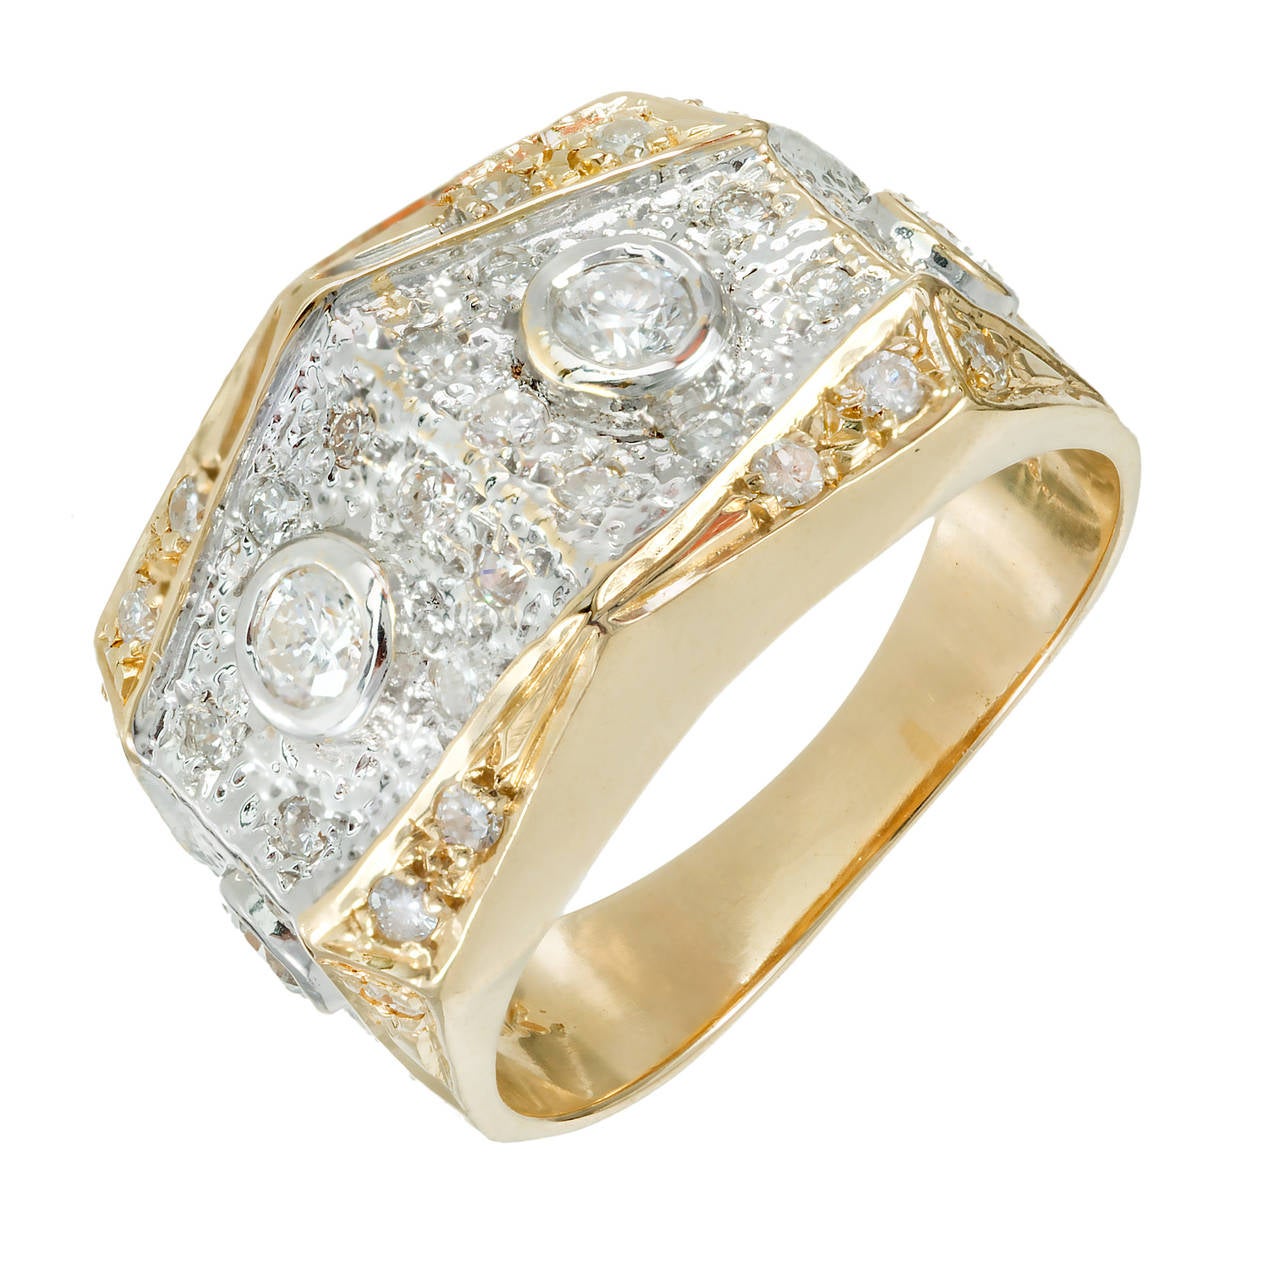 1960 18k yellow gold ring with 14k white gold sections with bright white diamonds. Suitable for men or women.

4 round diamonds, approx. total weight .40cts, G, VS – SI1
37 round diamonds¸ approx. total weight .38cts, G, VS – SI1
14k white and